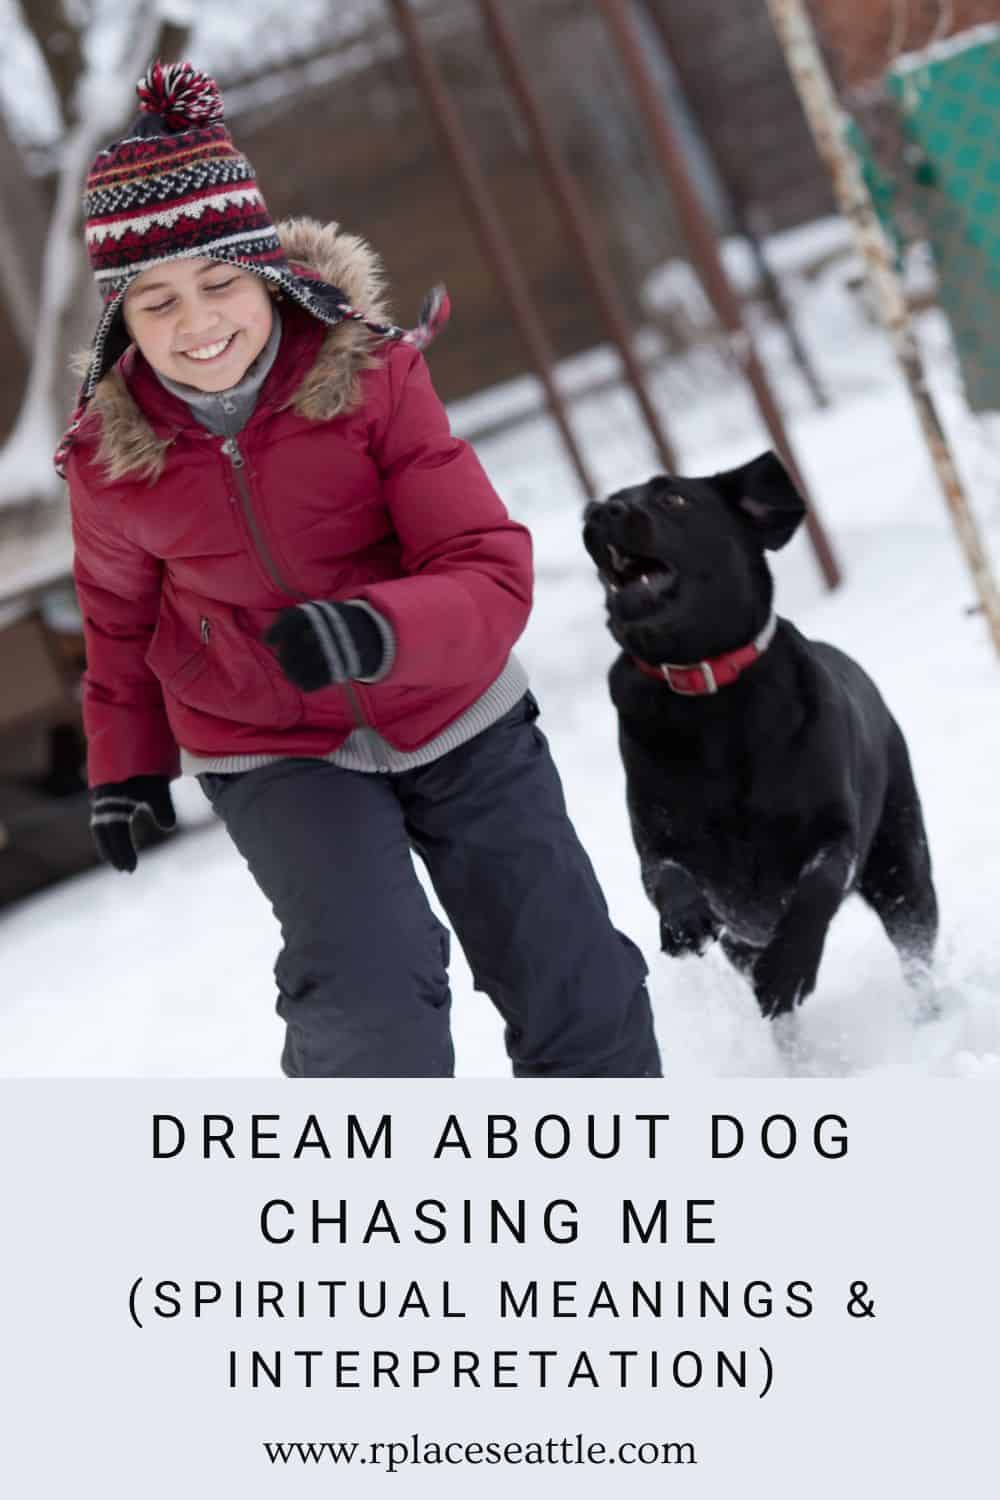 Dream About Dog Chasing Me (Spiritual Meanings & Interpretation)